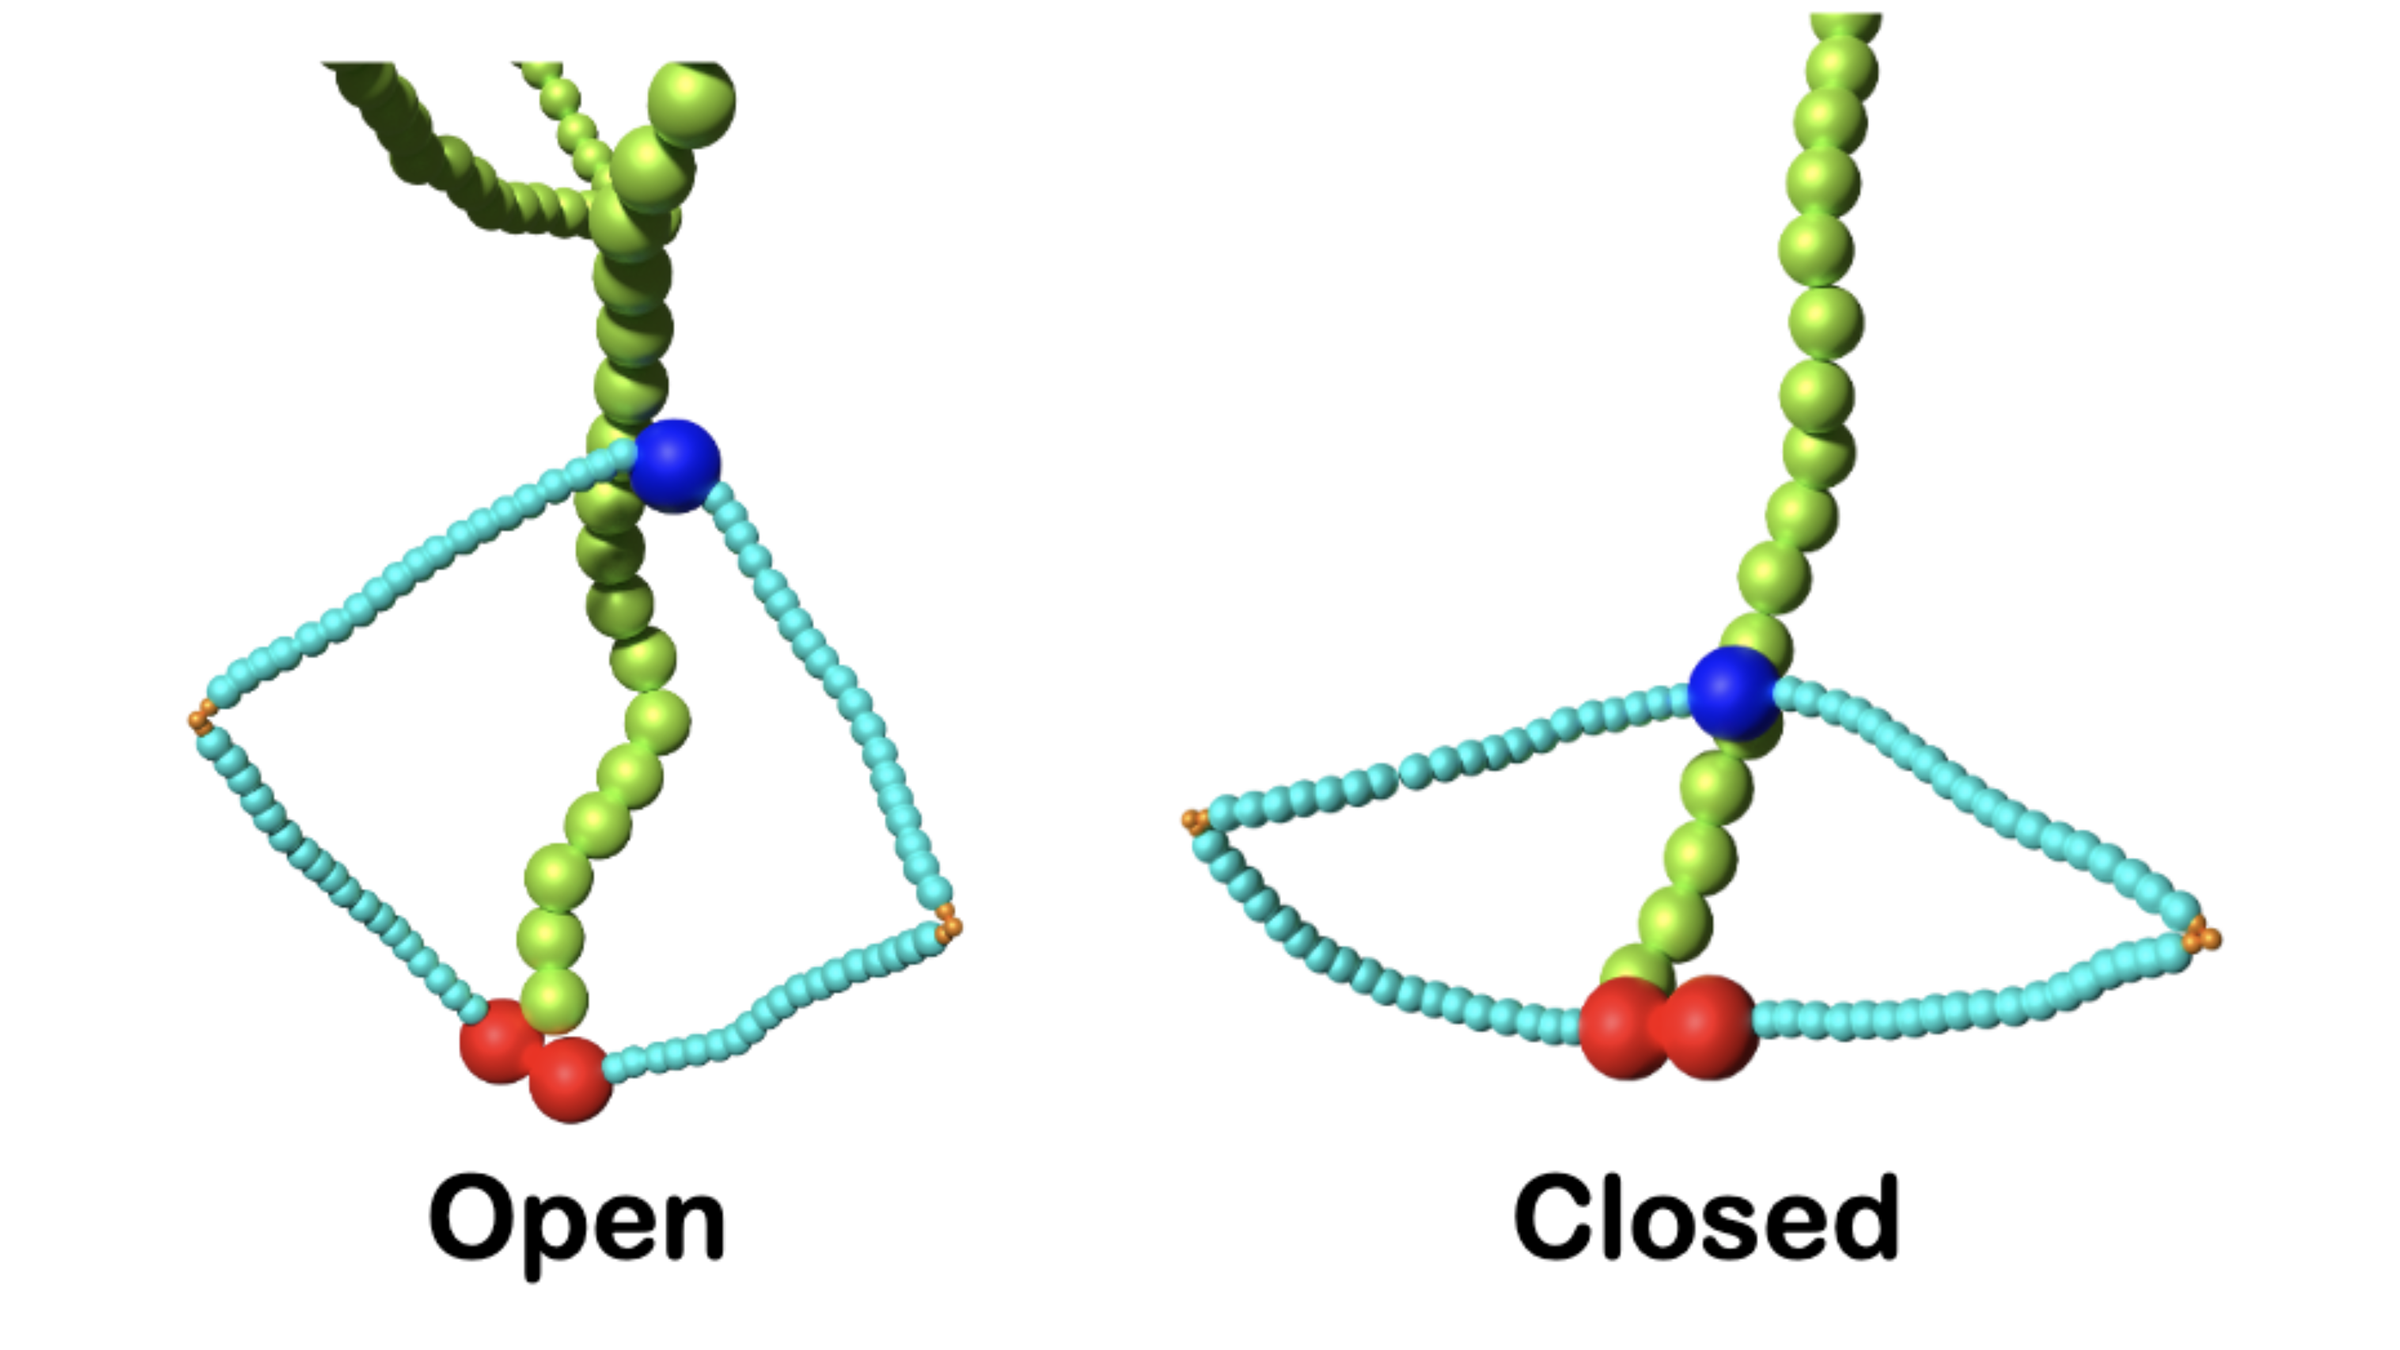 Illustrations of a molecule in two states, open and closed